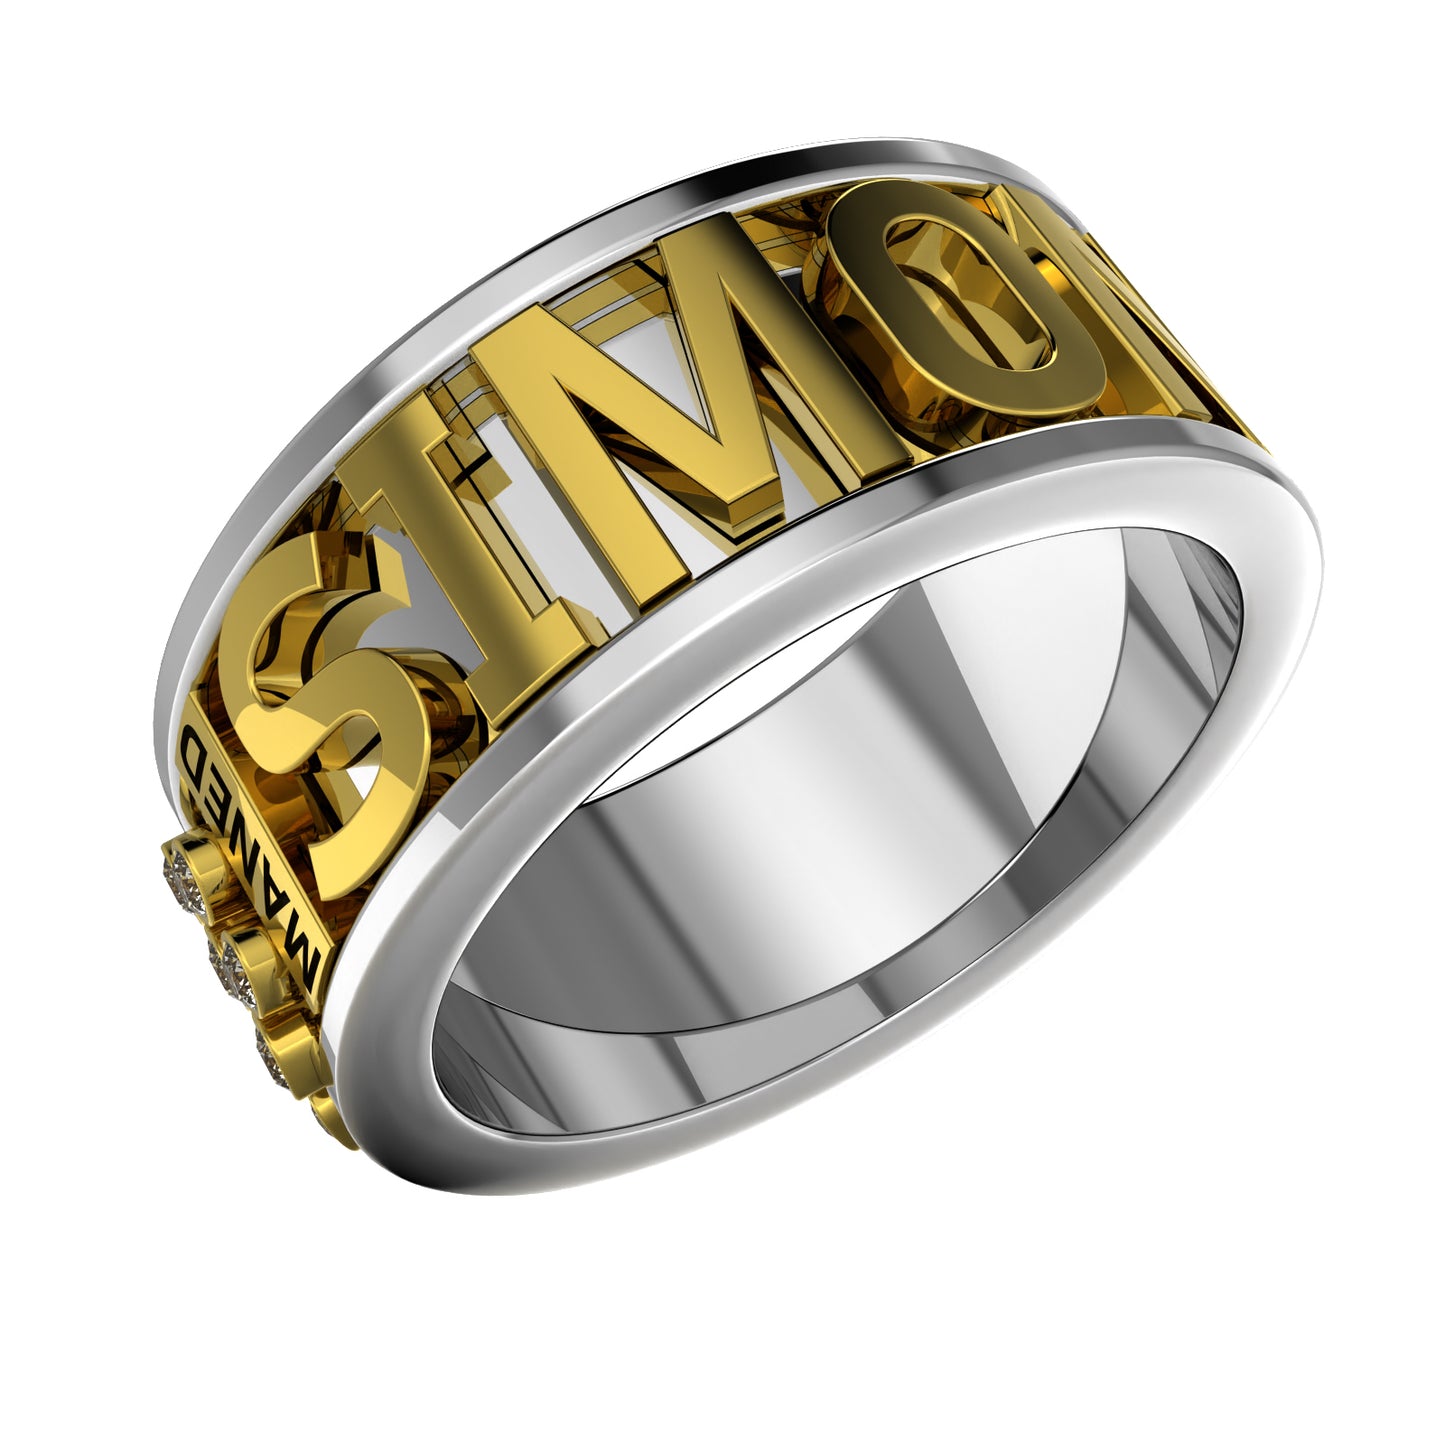 Orbing Name Ring - Build Your Own Ring